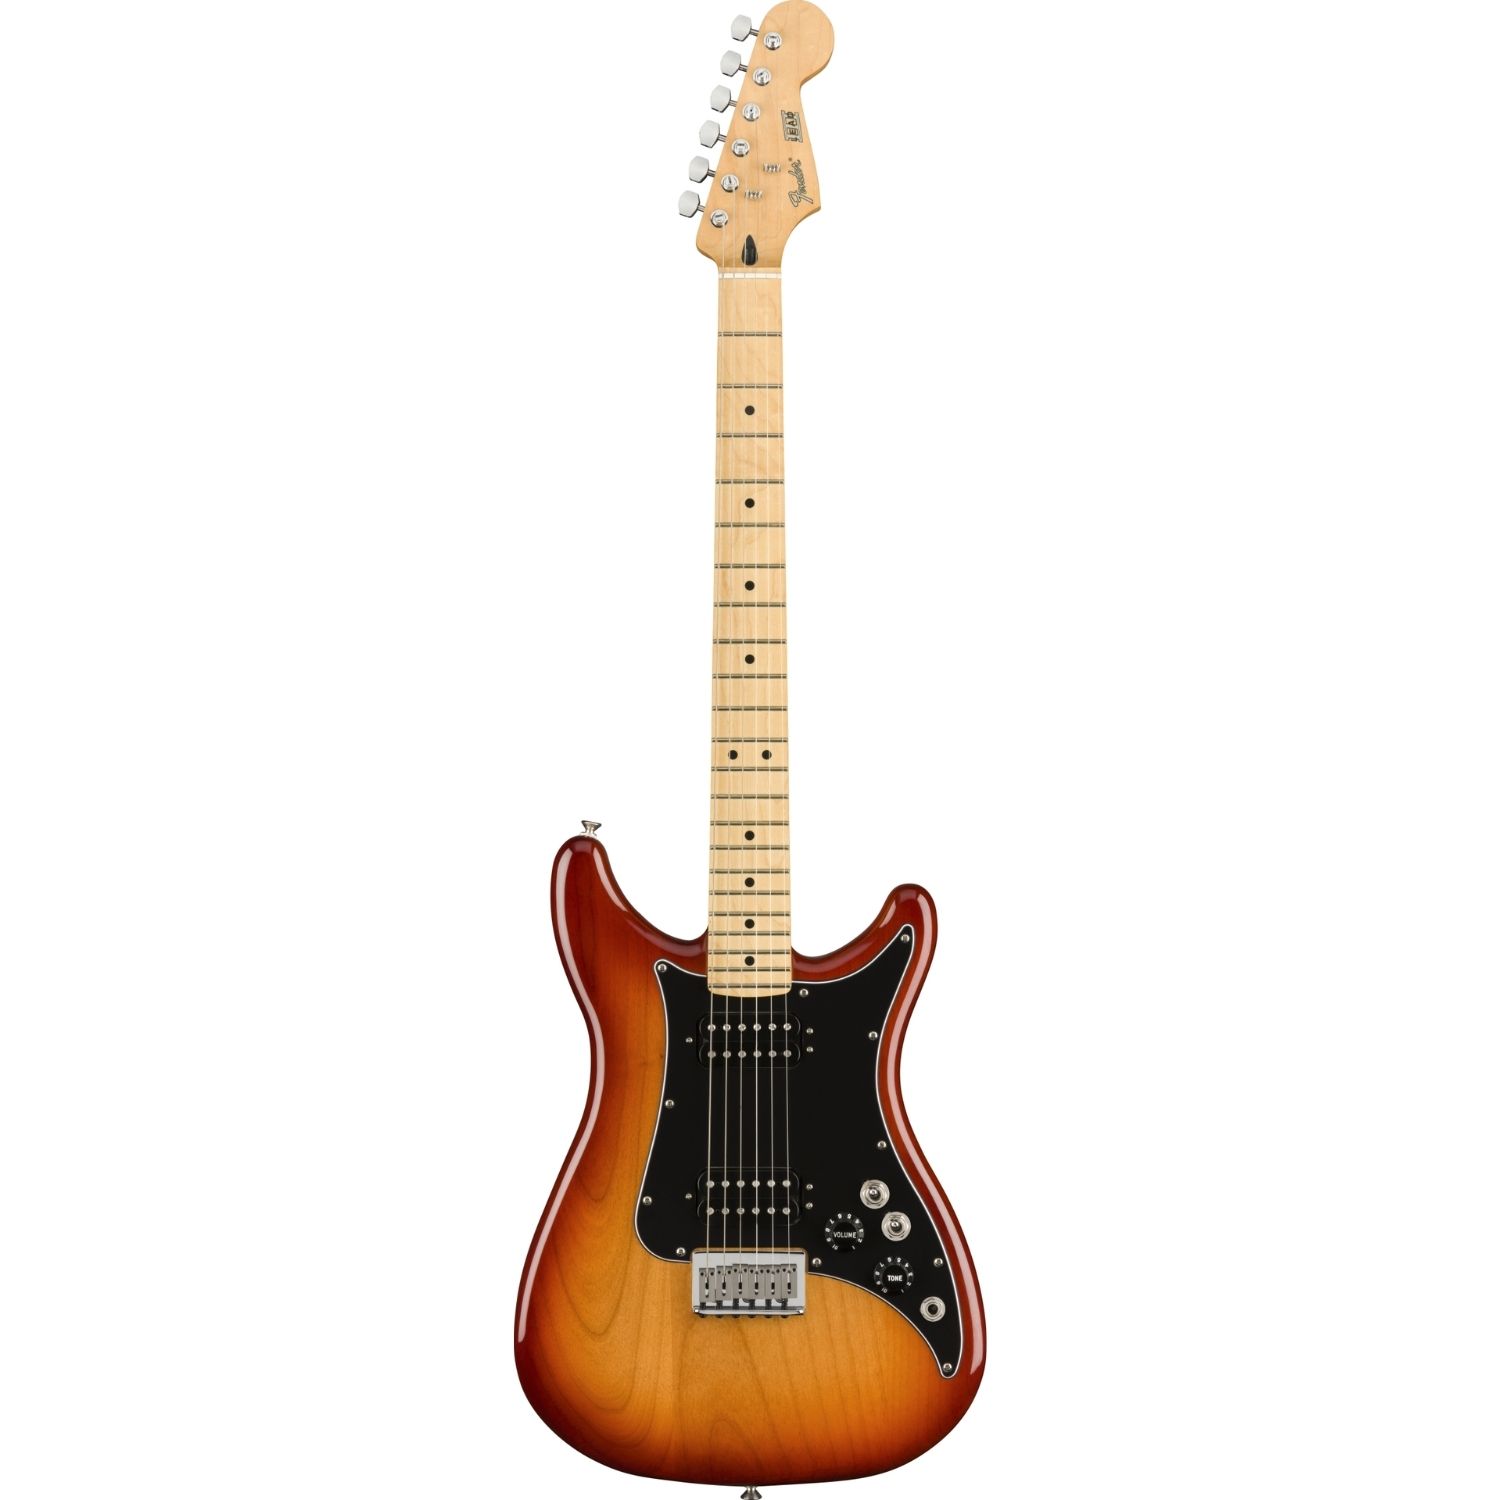 Fender Player Strat, Lead III online price in India